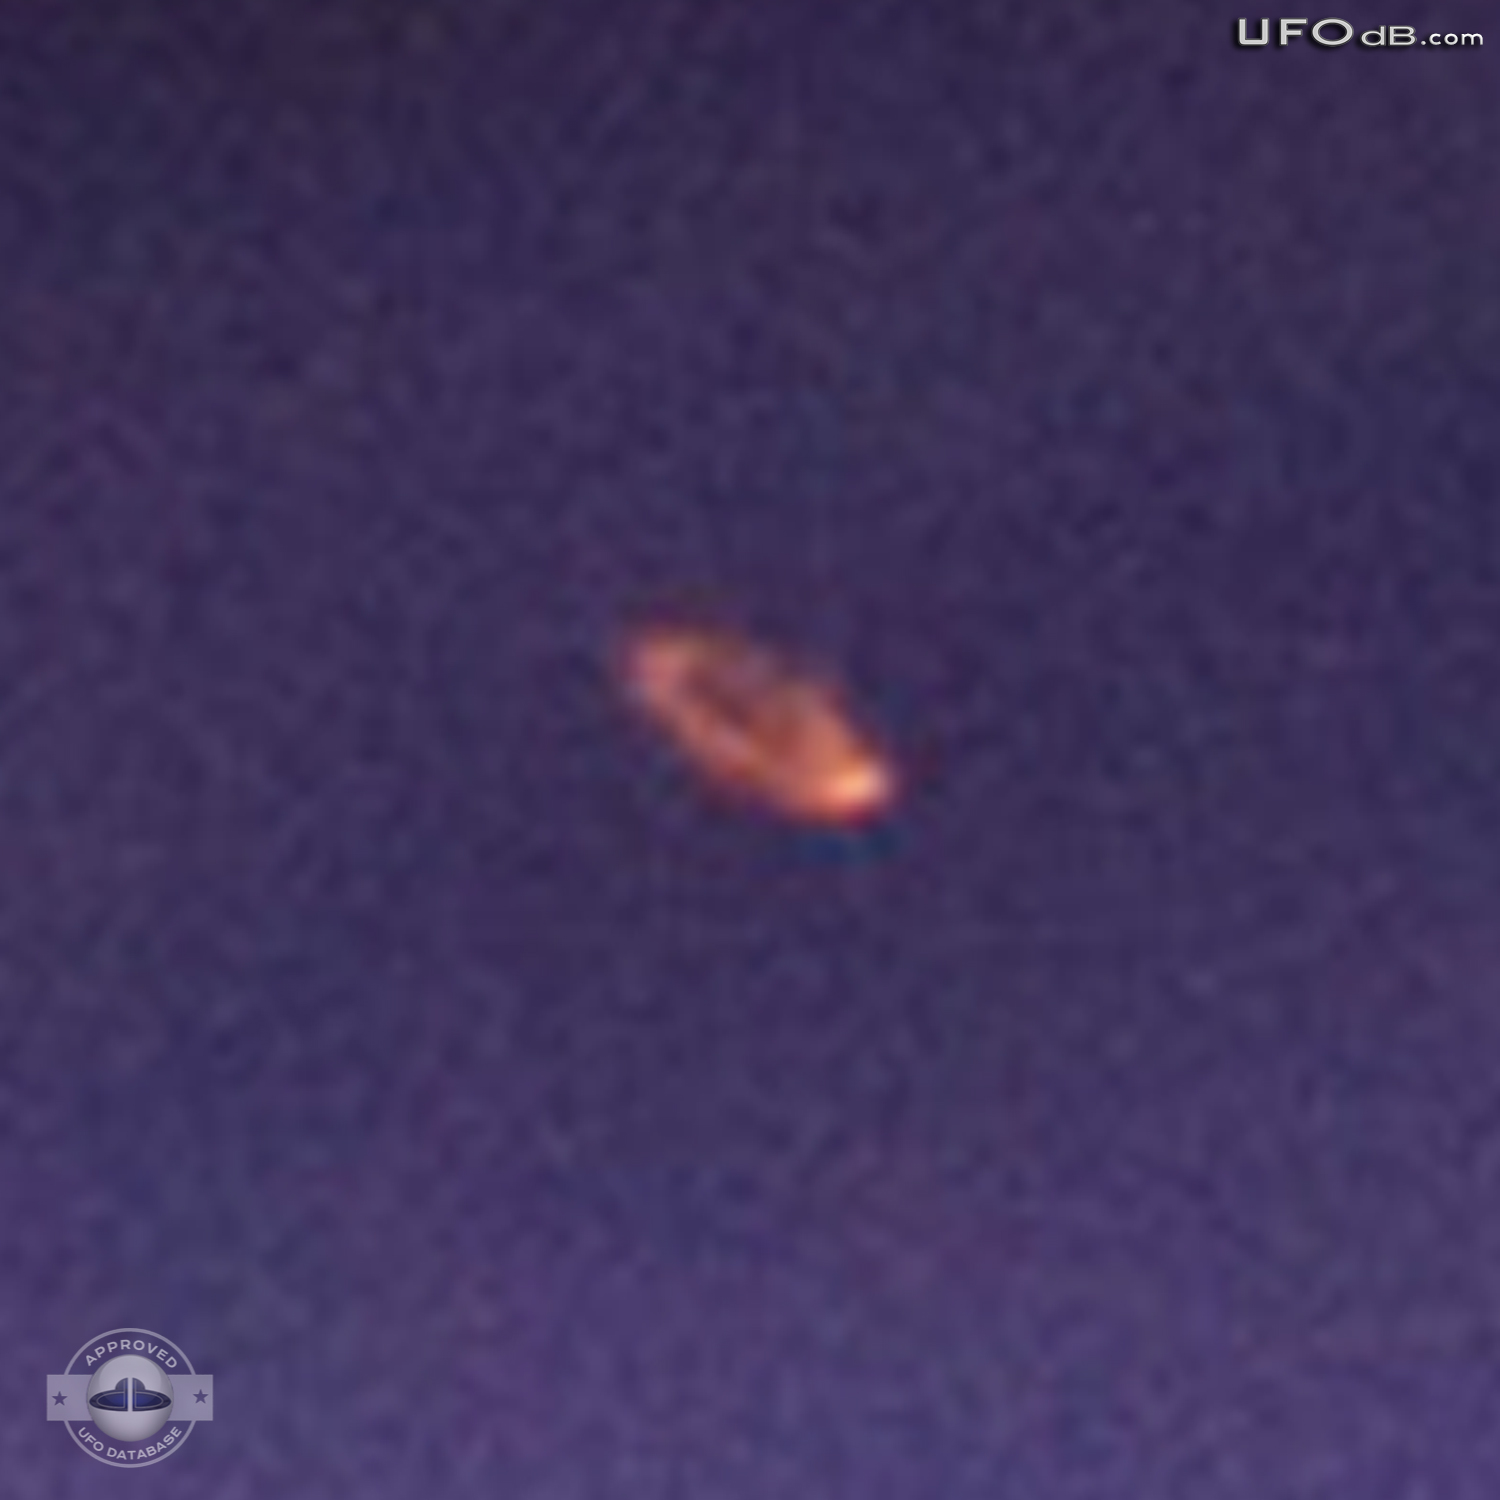 Professional photographer capture UFO near lightnings in Portugal 2010 UFO Picture #345-4